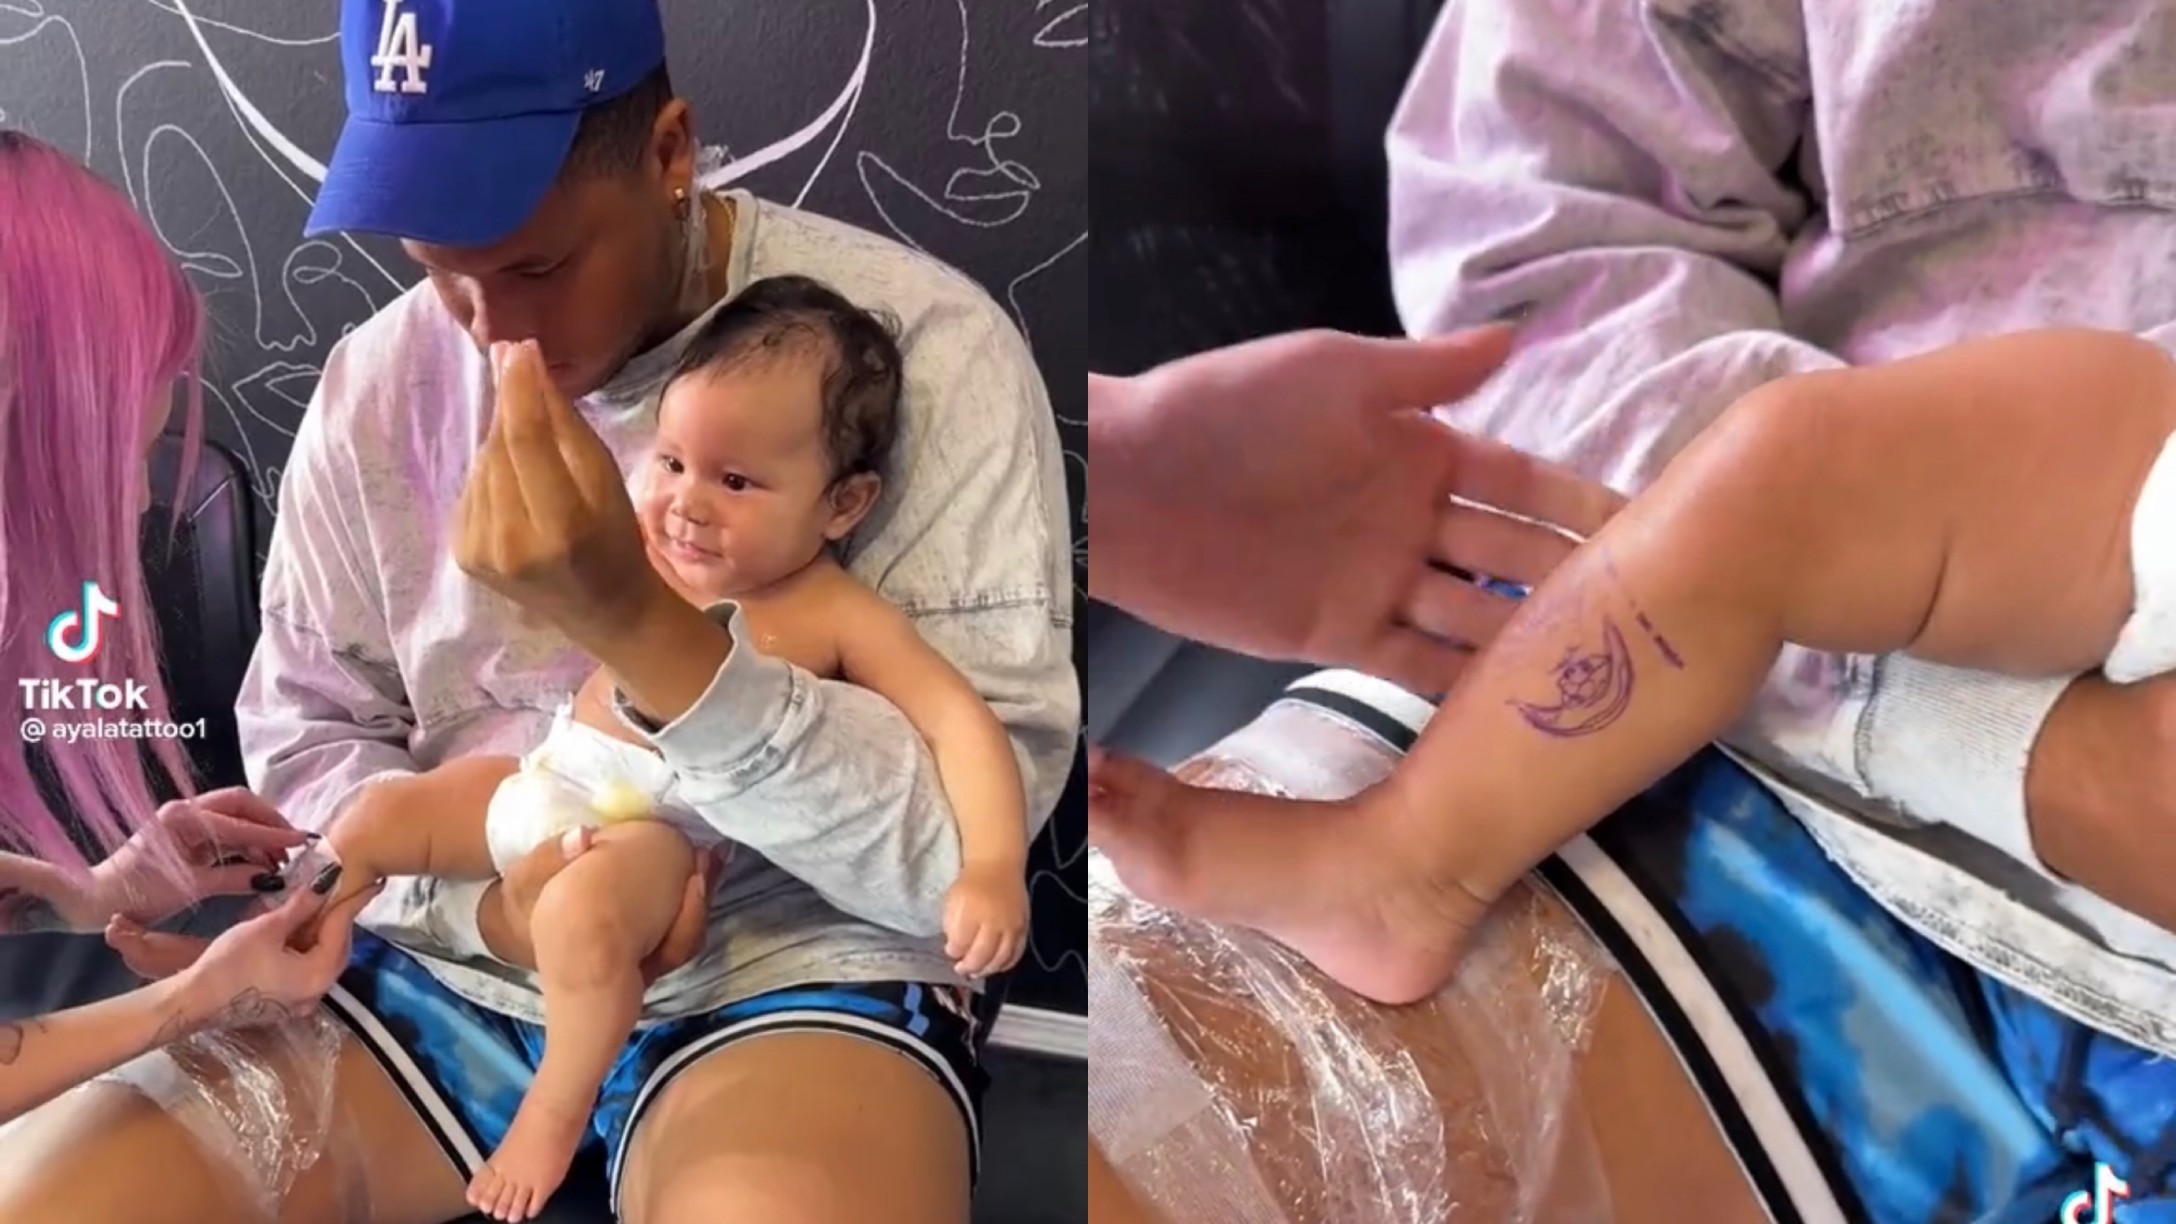 Controversy over 4-year-old giving her dad a tattoo